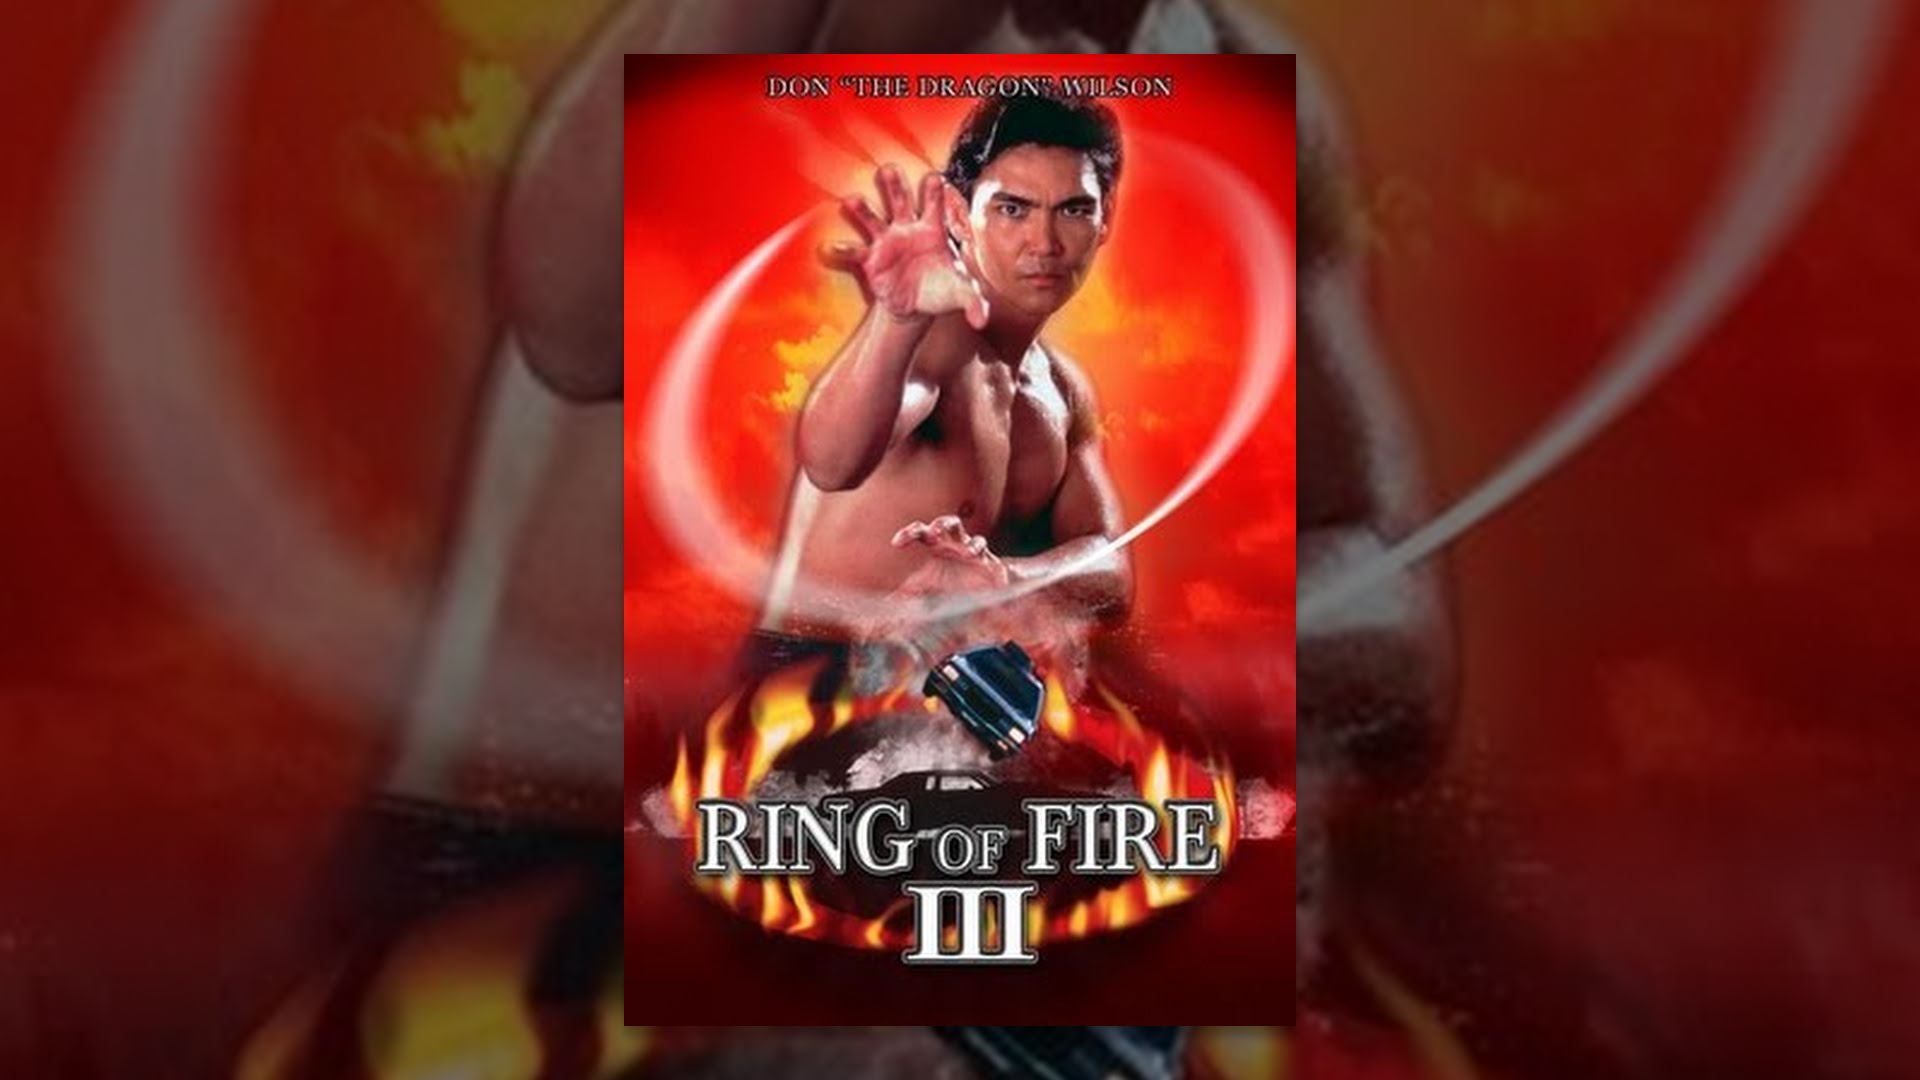 Antipoison Zelfrespect stoomboot Ring of Fire 3 aka Lion Strike - Movies on Google Play